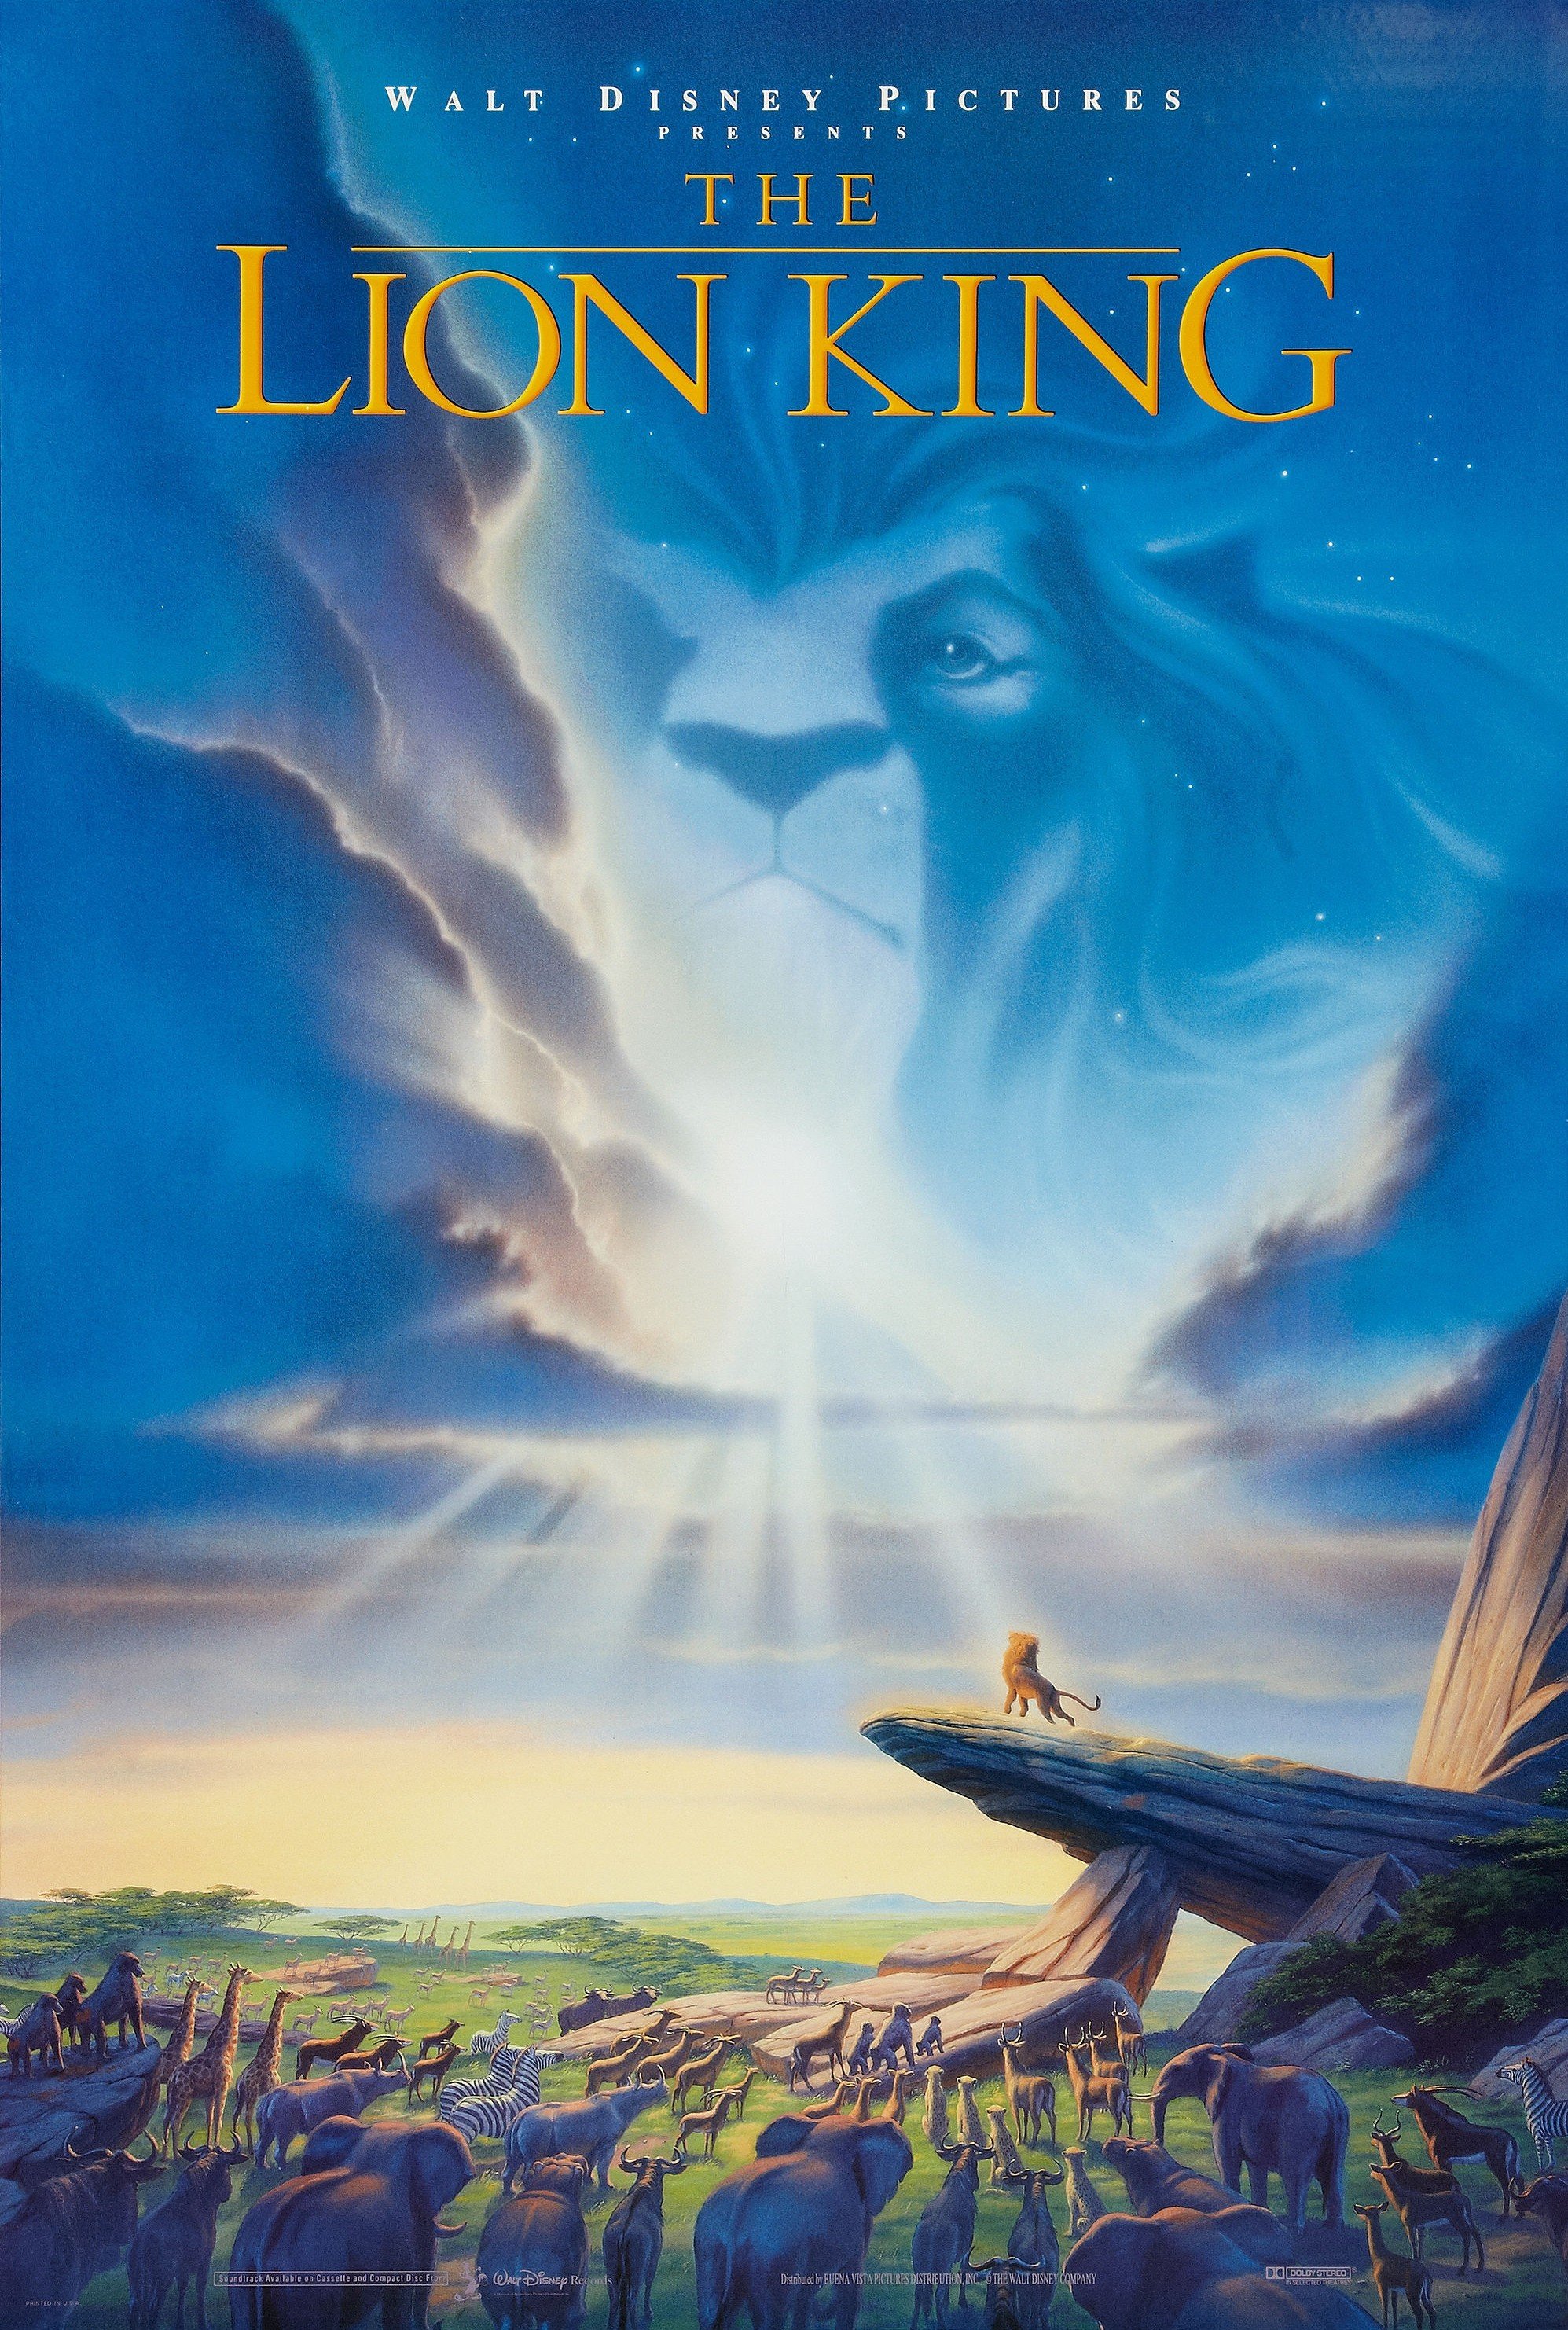 Image of the movie cover featuring a Lion standing on a cliff looking up at an image of a lion looking down from the sky. Many types of Jungle animals below the cliff looking up to the sky as well.